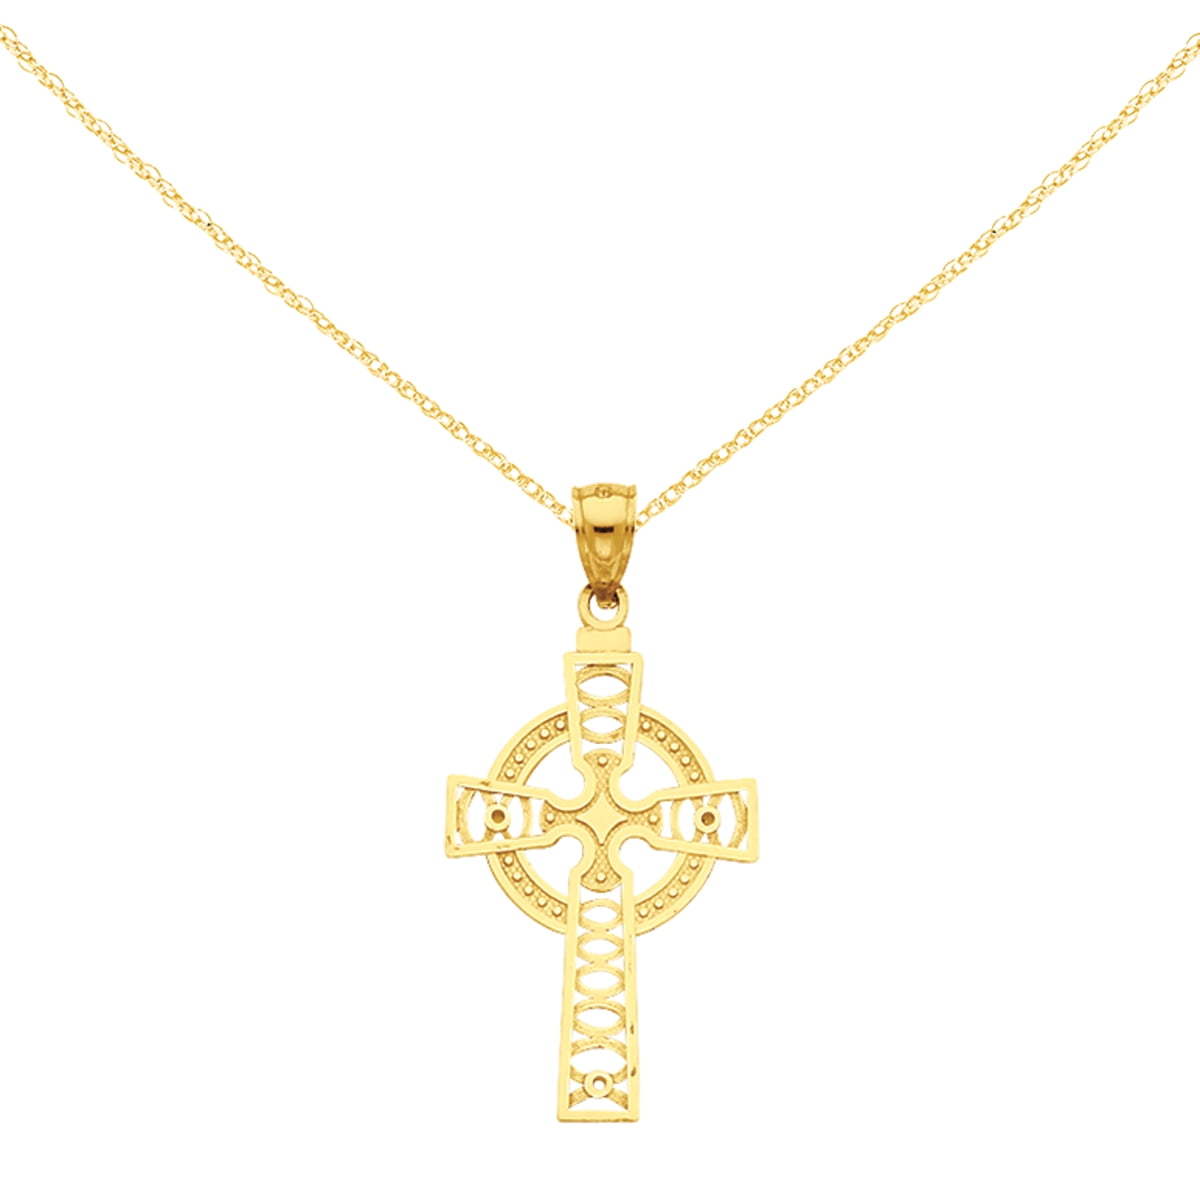 Eternity Gold Celtic Cross Pendant Necklace in 10K Yellow Gold 18" 